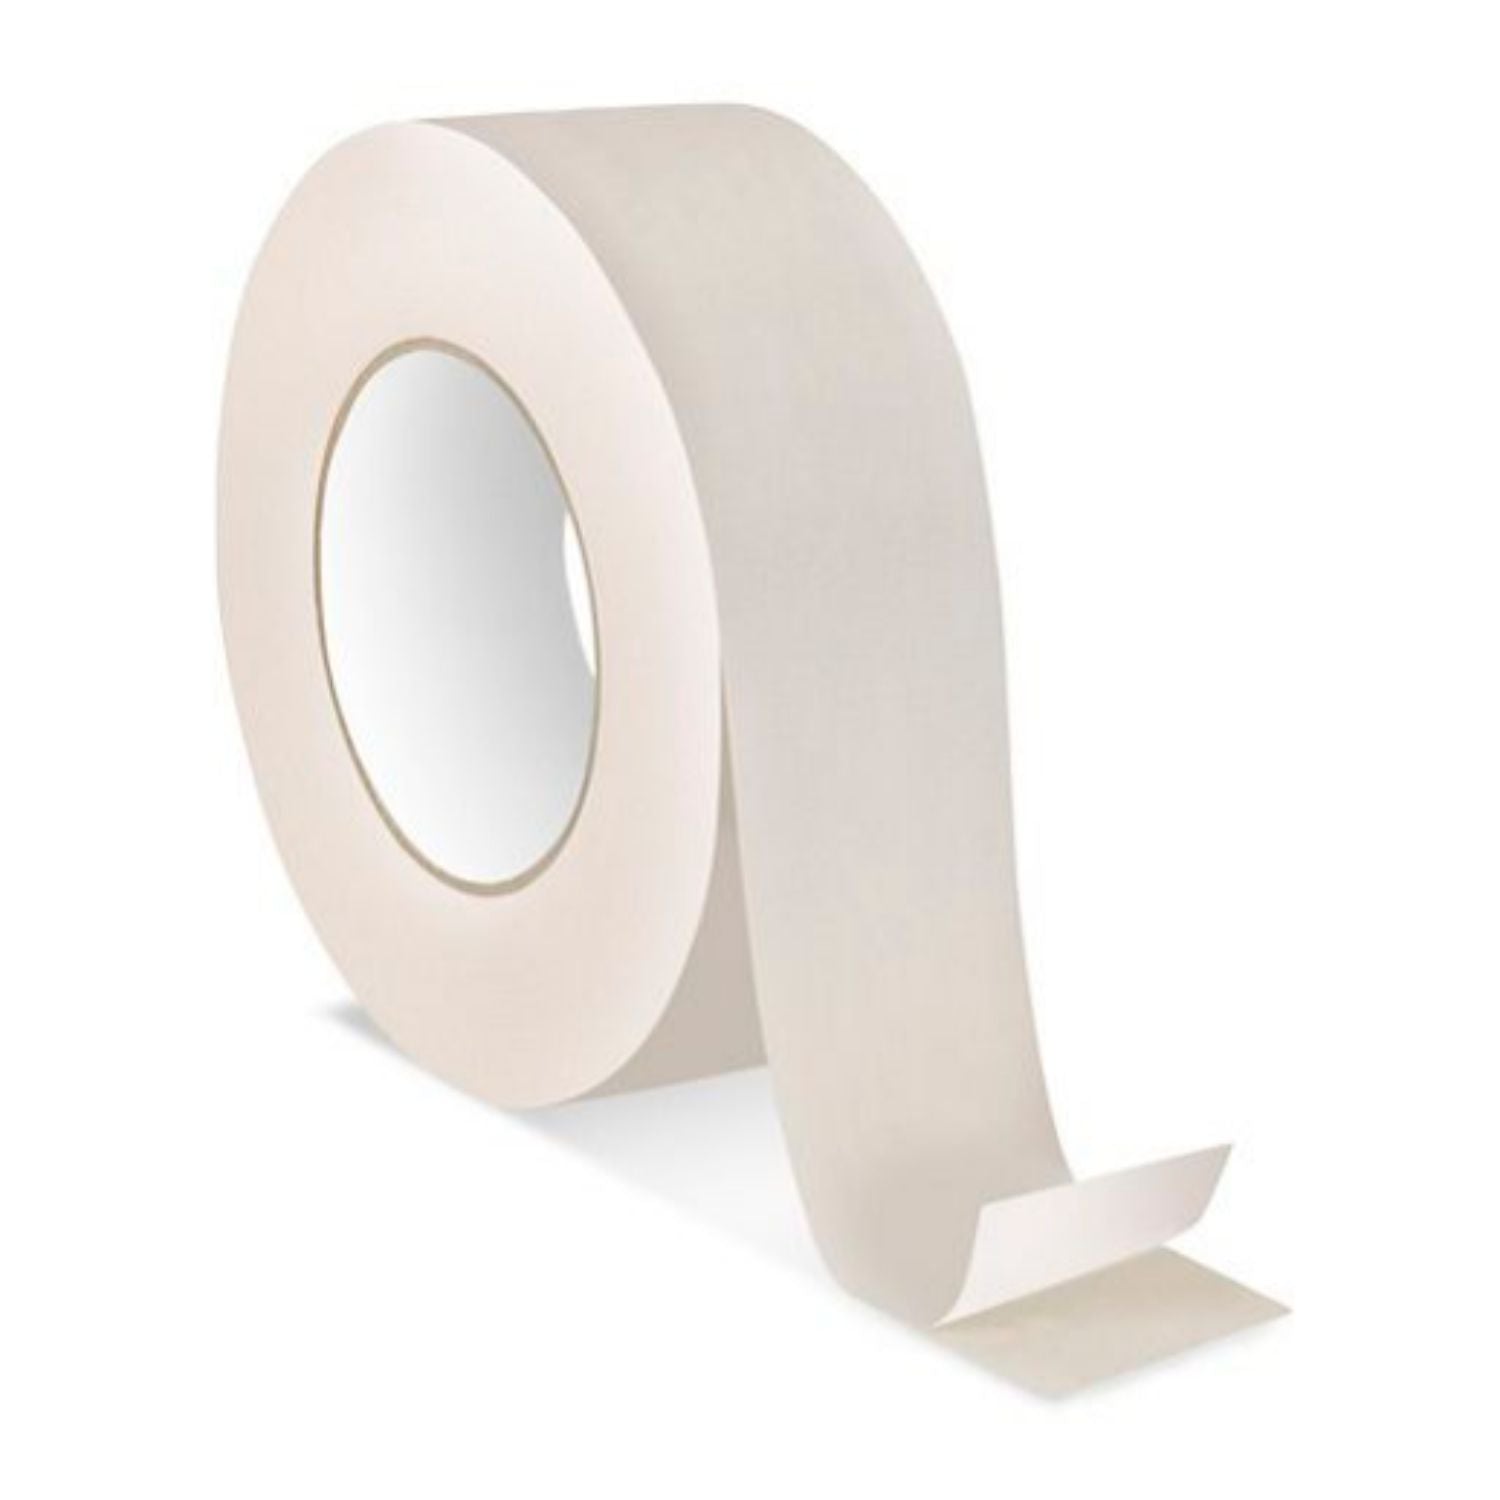 Die Mounting Tape - Rubber Stamp Materials